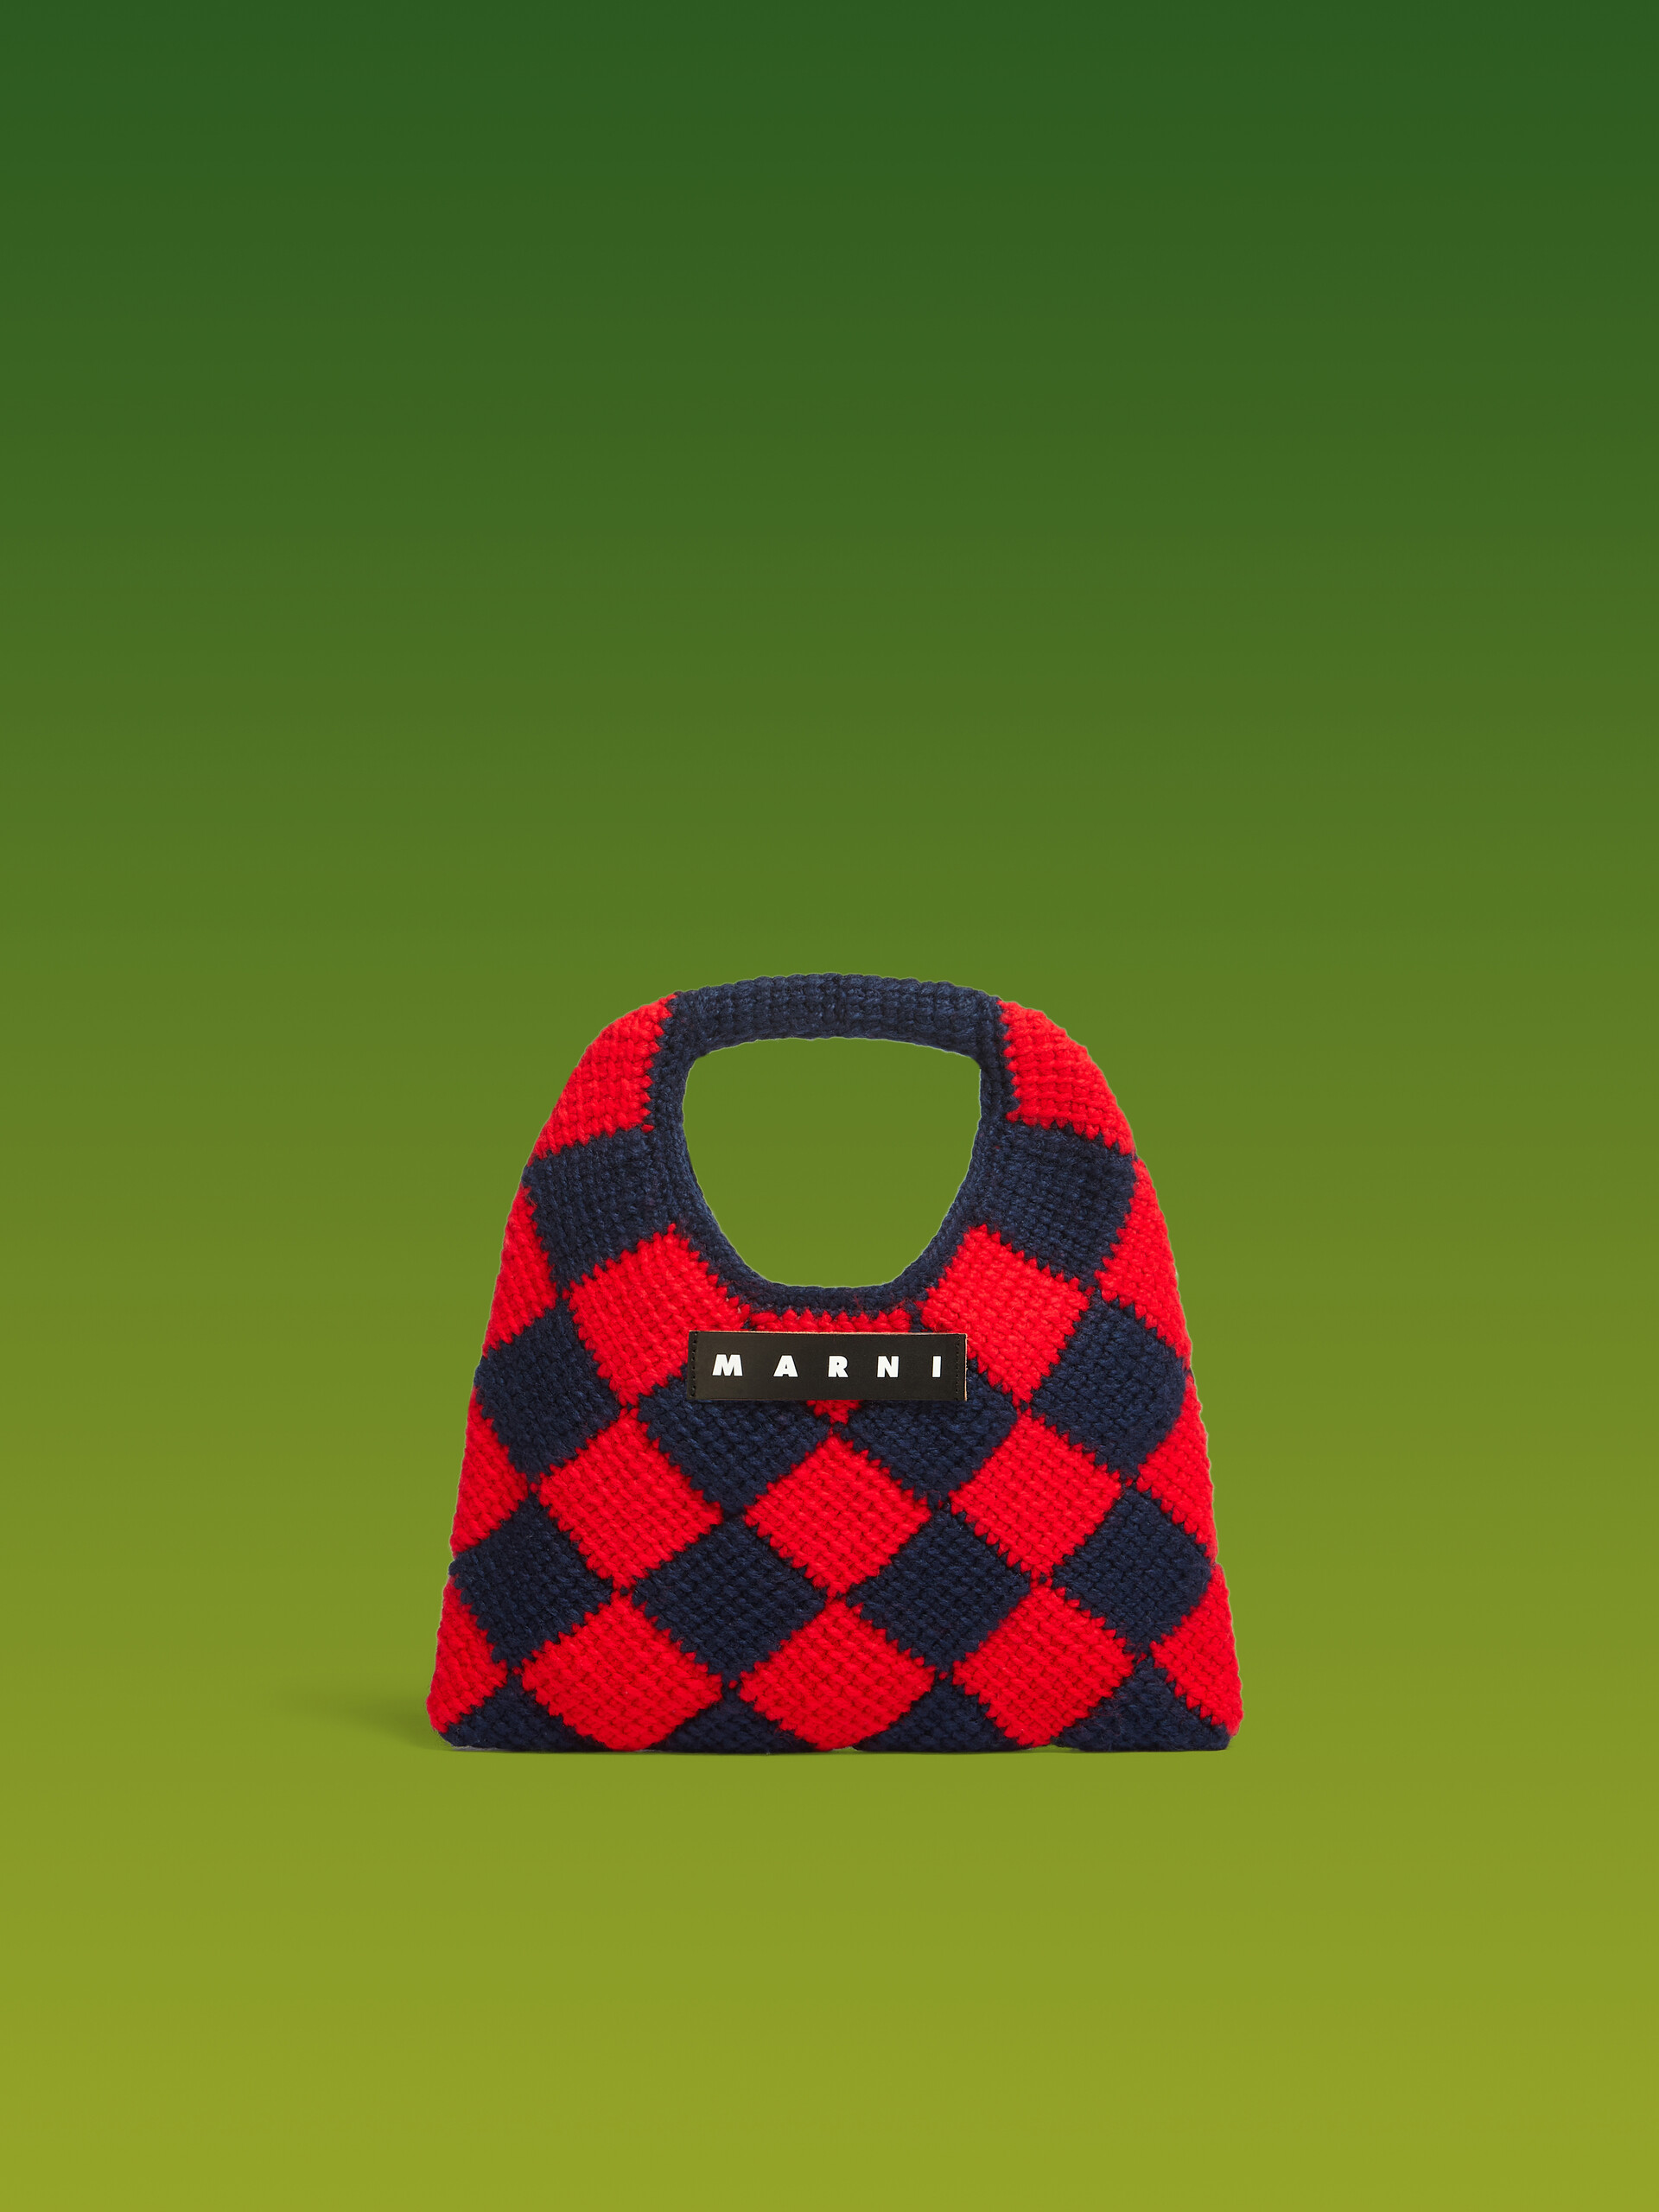 MARNI MARKET DIAMOND small bag in blue and red tech wool